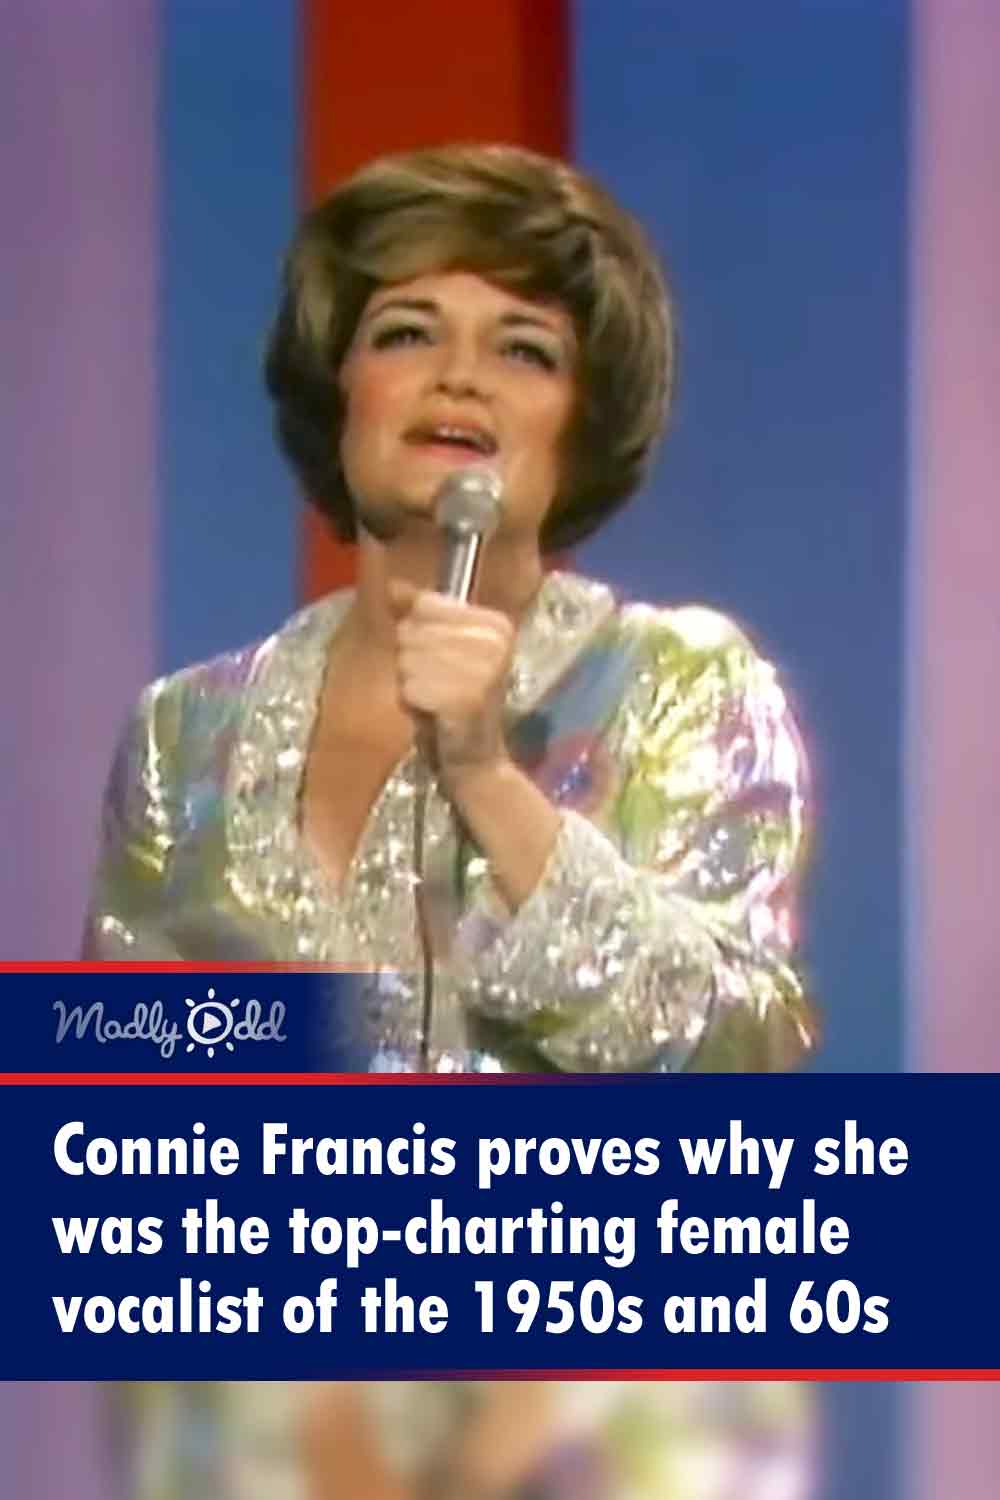 Connie Francis proves why she was the top-charting female vocalist of the 1950s and 60s